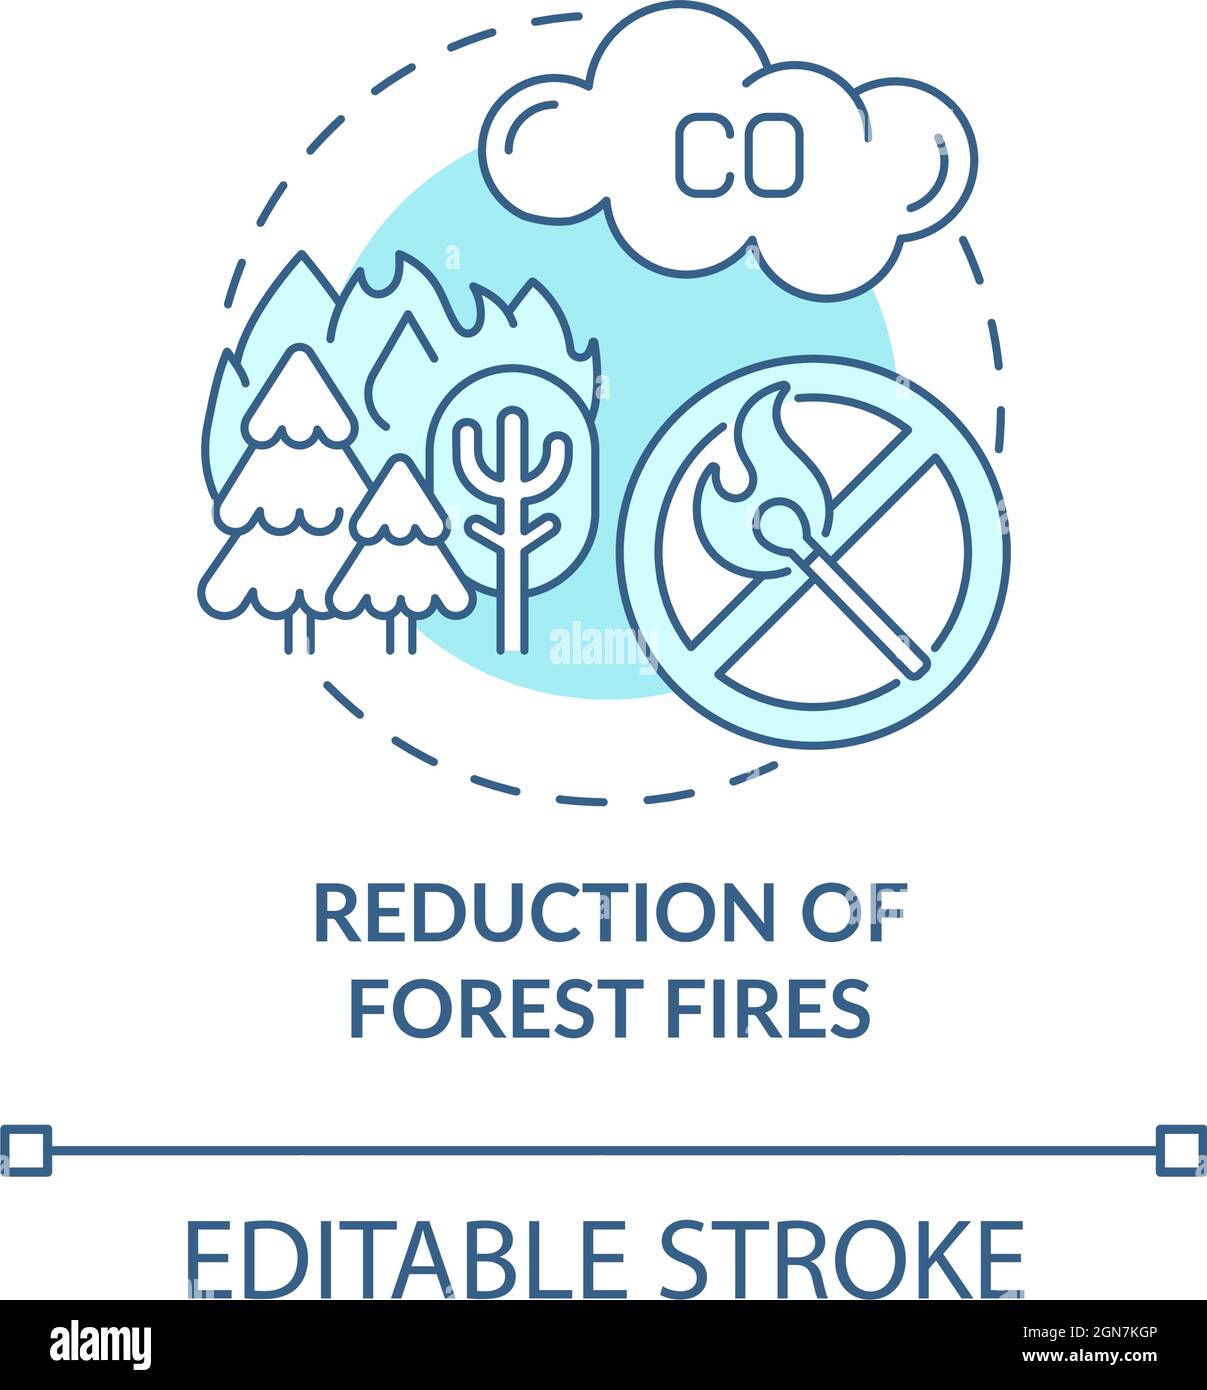 Forest fires reduction concept icon Stock Vector